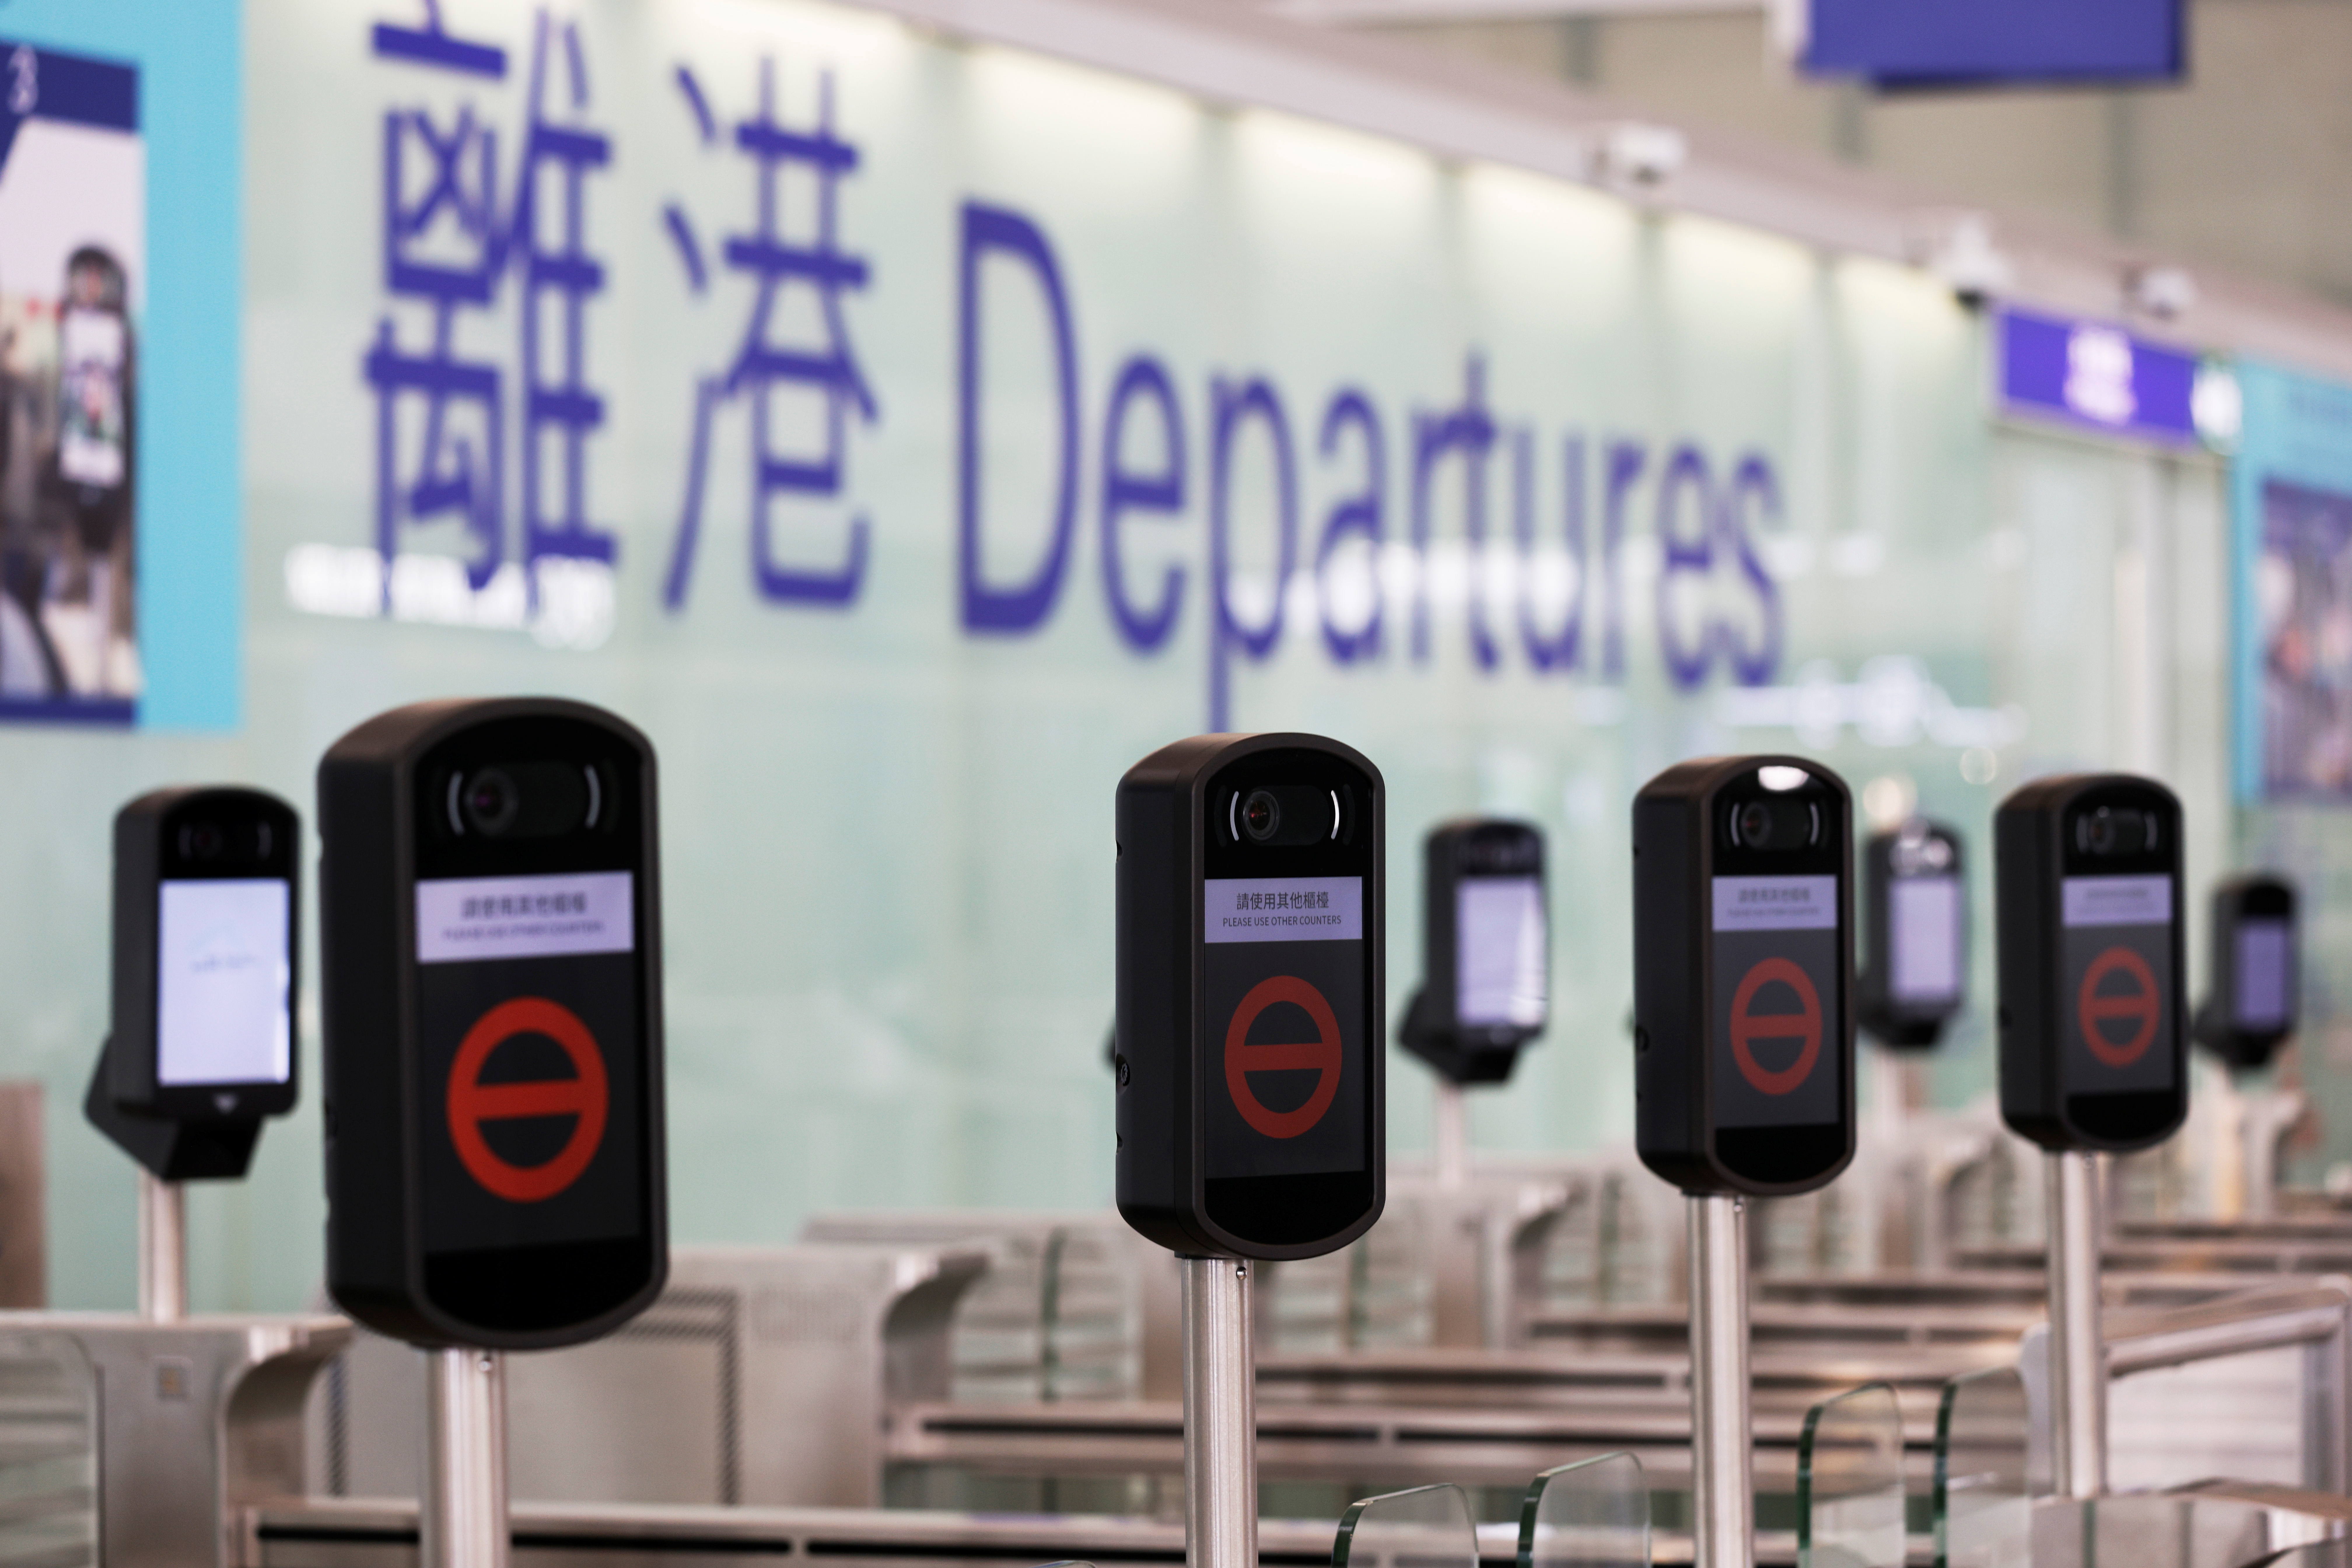 Closed counters are seen at the departures hall of Hong Kong International Airport, following the coronavirus disease (COVID-19) outbreak, in Hong Kong, China February 2, 2021. REUTERS/Tyrone Siu